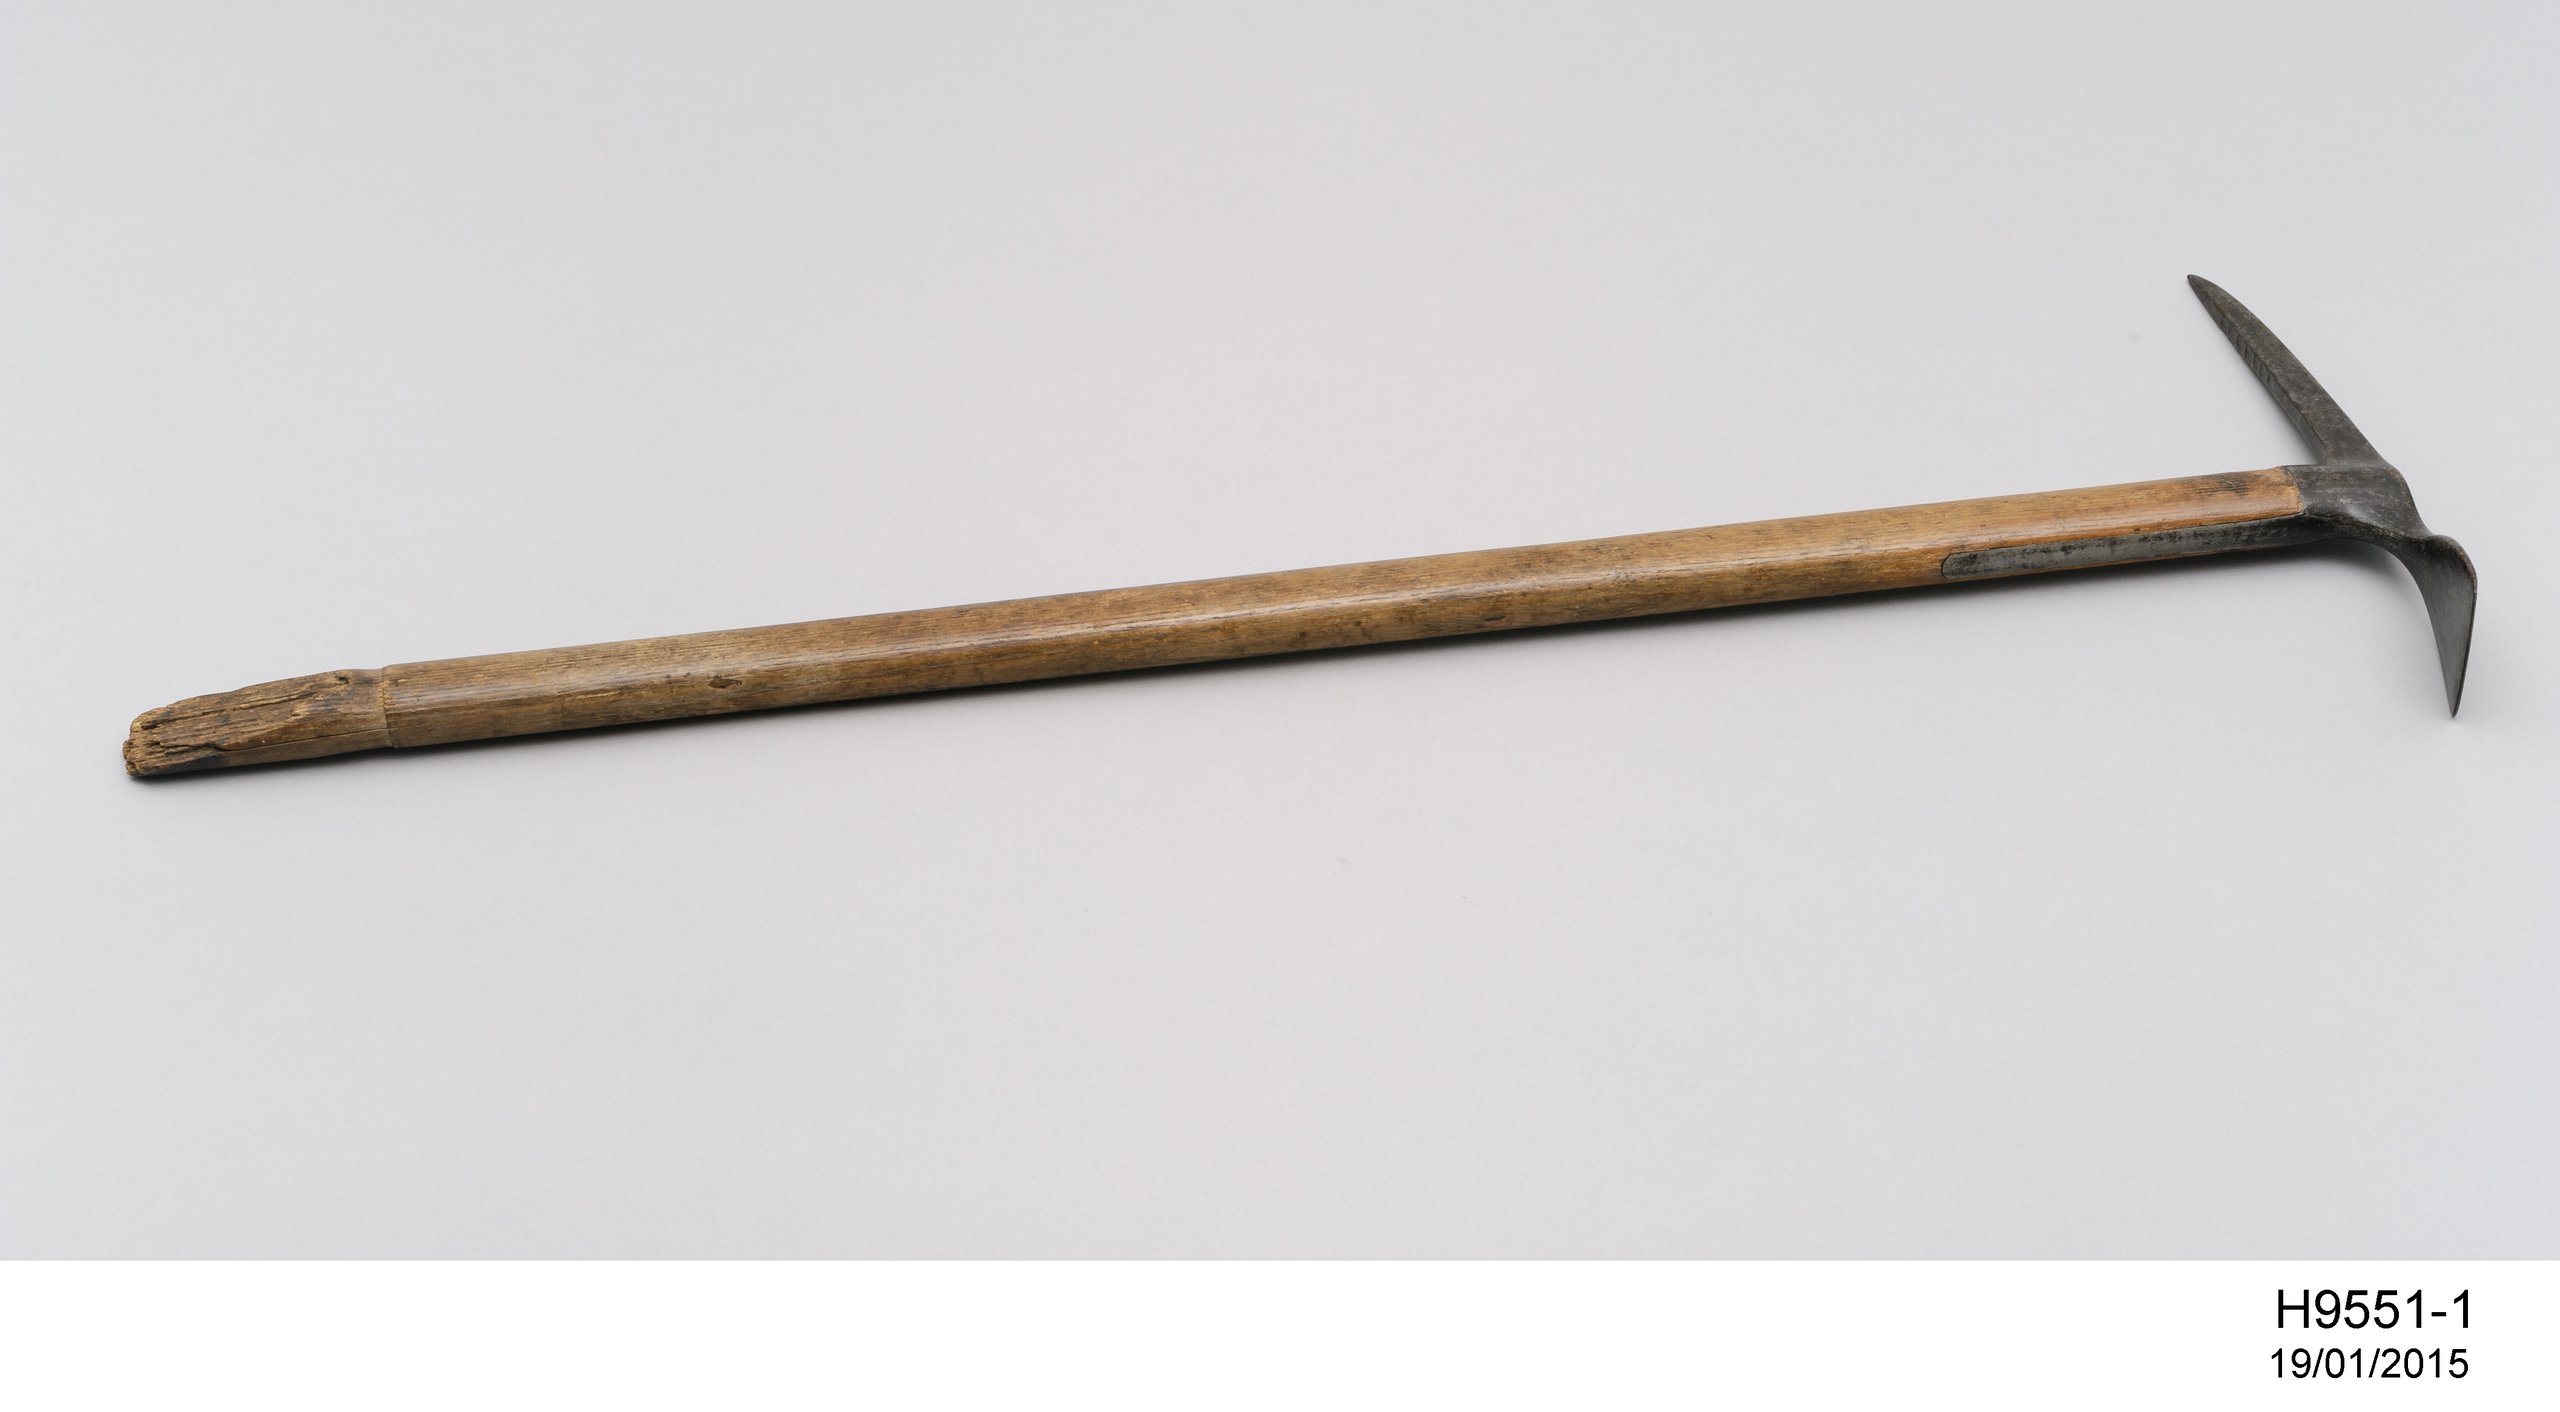 Ice axe used during the Sir Douglas Mawson's Australasian Antarctic Expedition